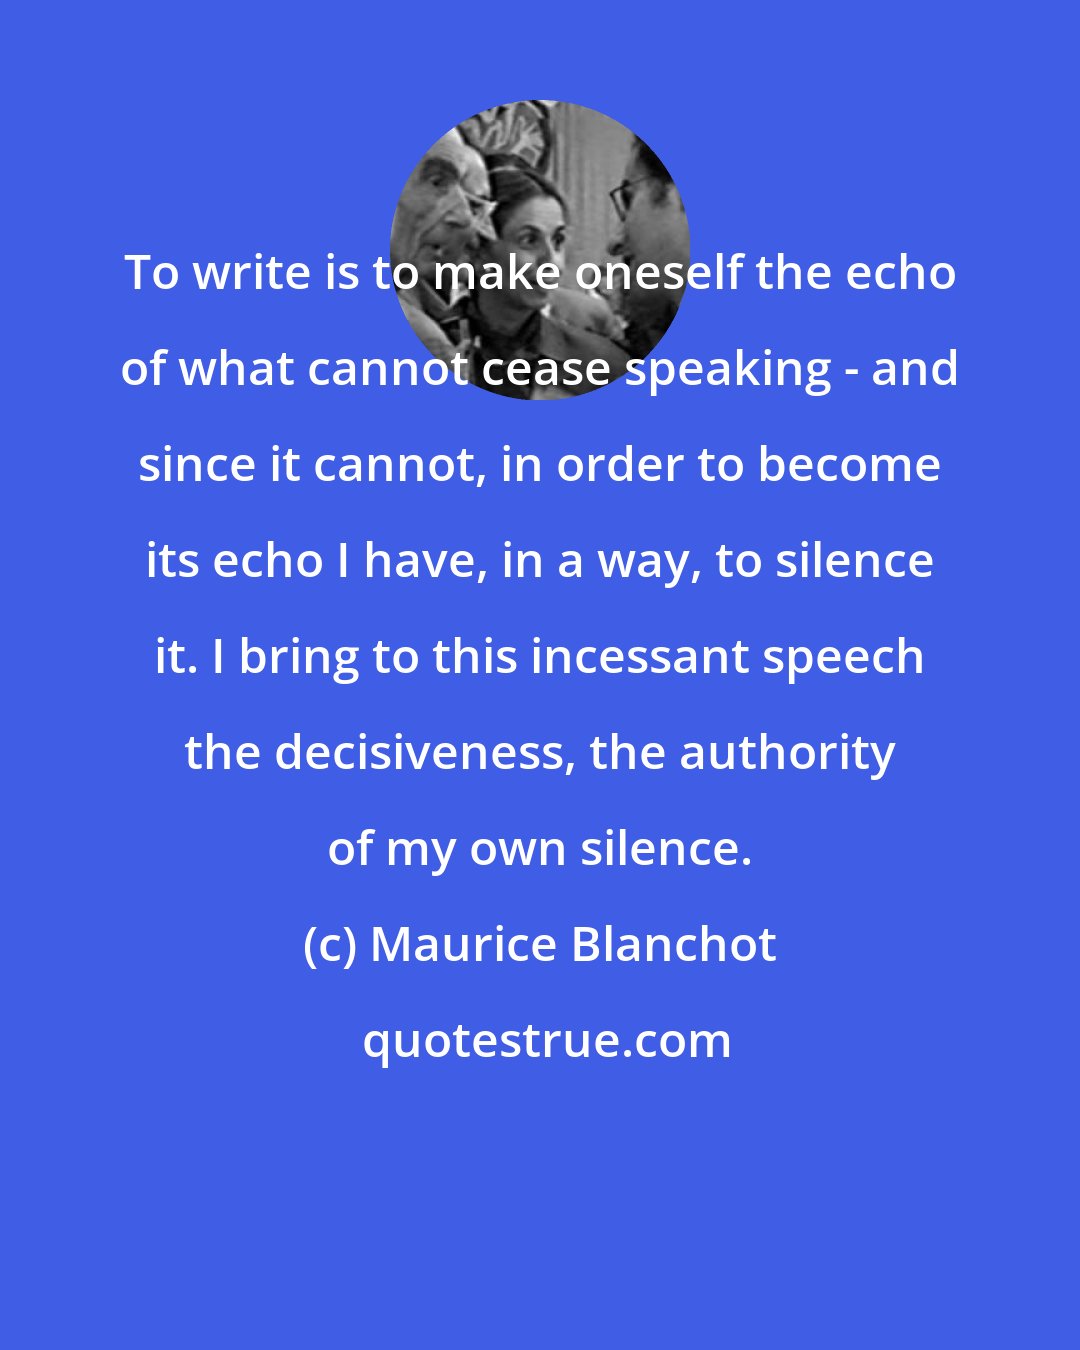 Maurice Blanchot: To write is to make oneself the echo of what cannot cease speaking - and since it cannot, in order to become its echo I have, in a way, to silence it. I bring to this incessant speech the decisiveness, the authority of my own silence.